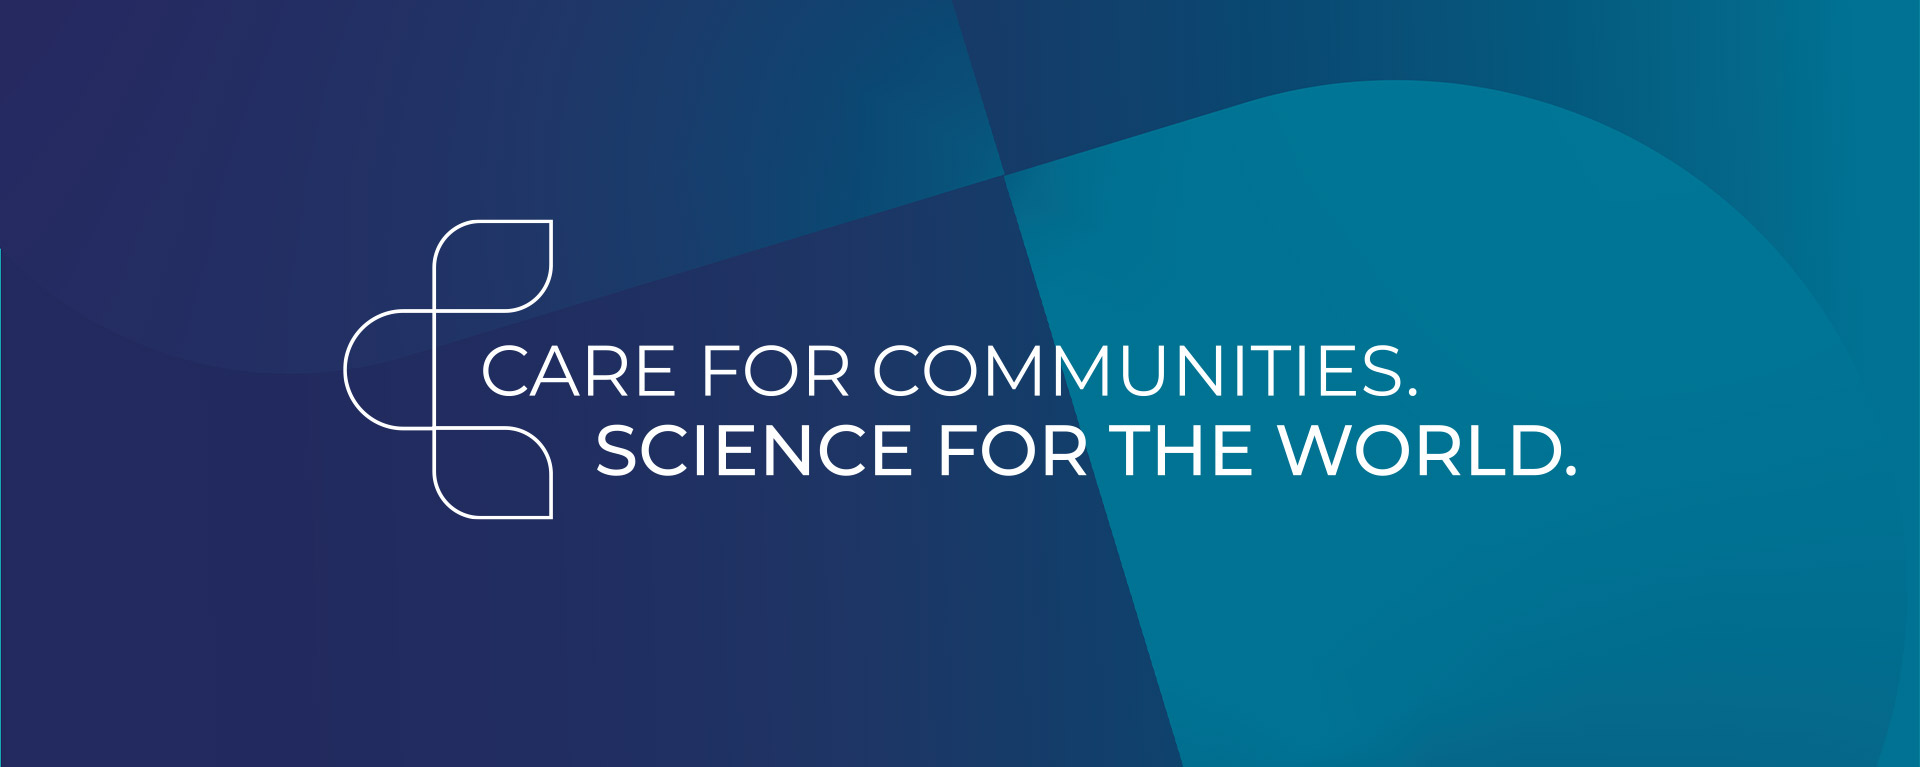 Banner image depicting the lockup for the University of Illinois campaign "Care for Communities. Science for the World" against an abstract blue background.